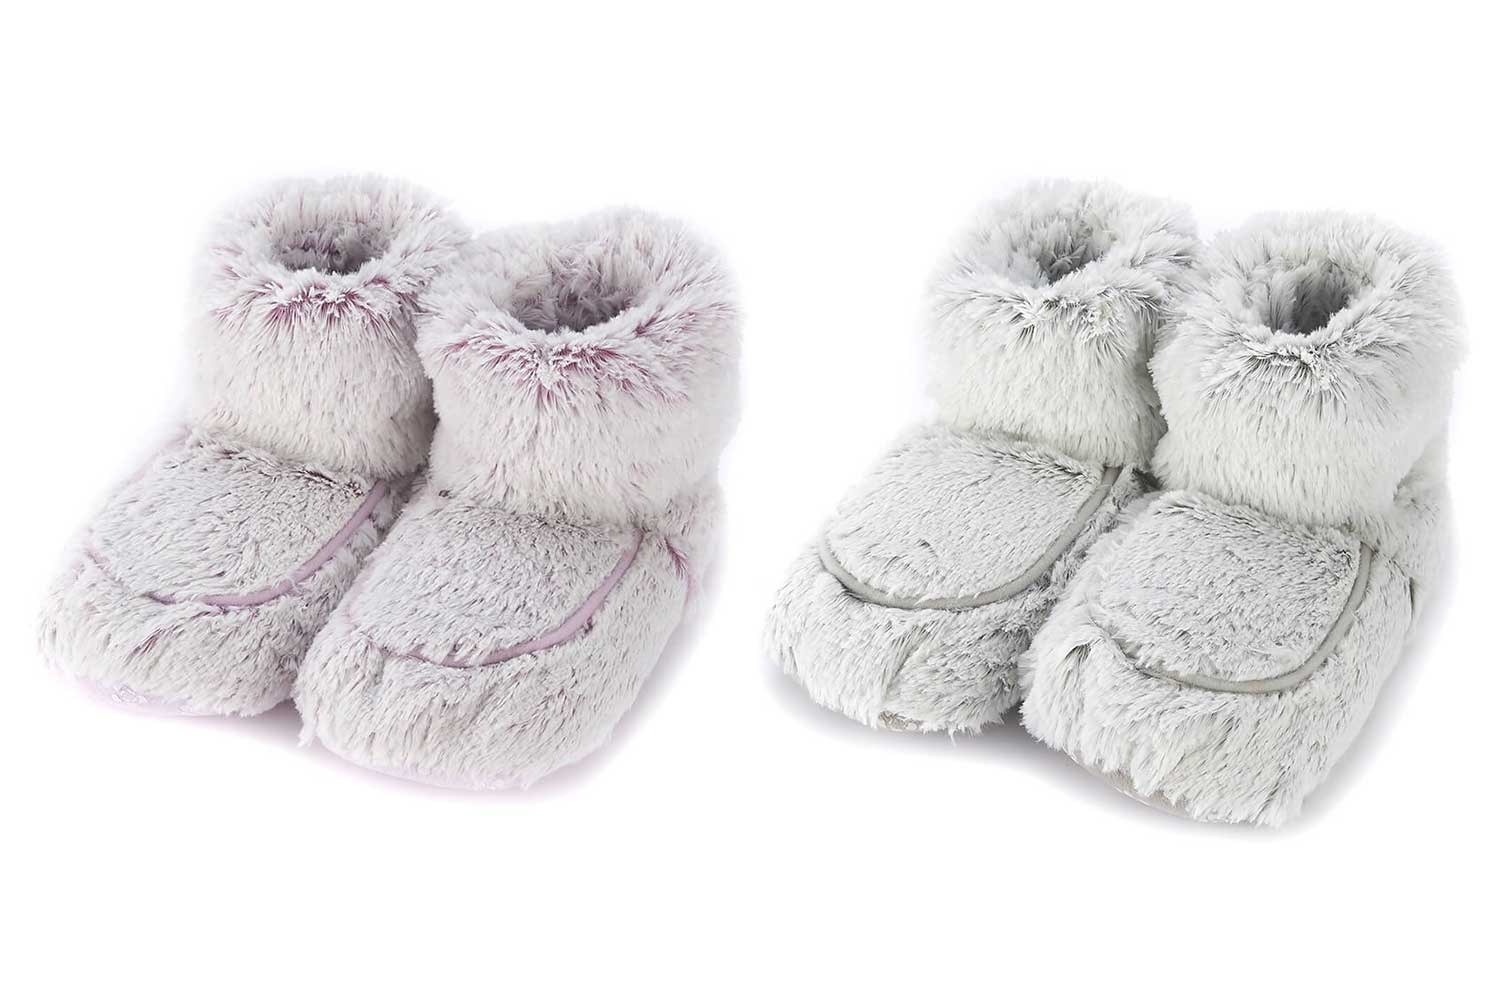 Microwavable slippers are a thing, and they're perfect for winter